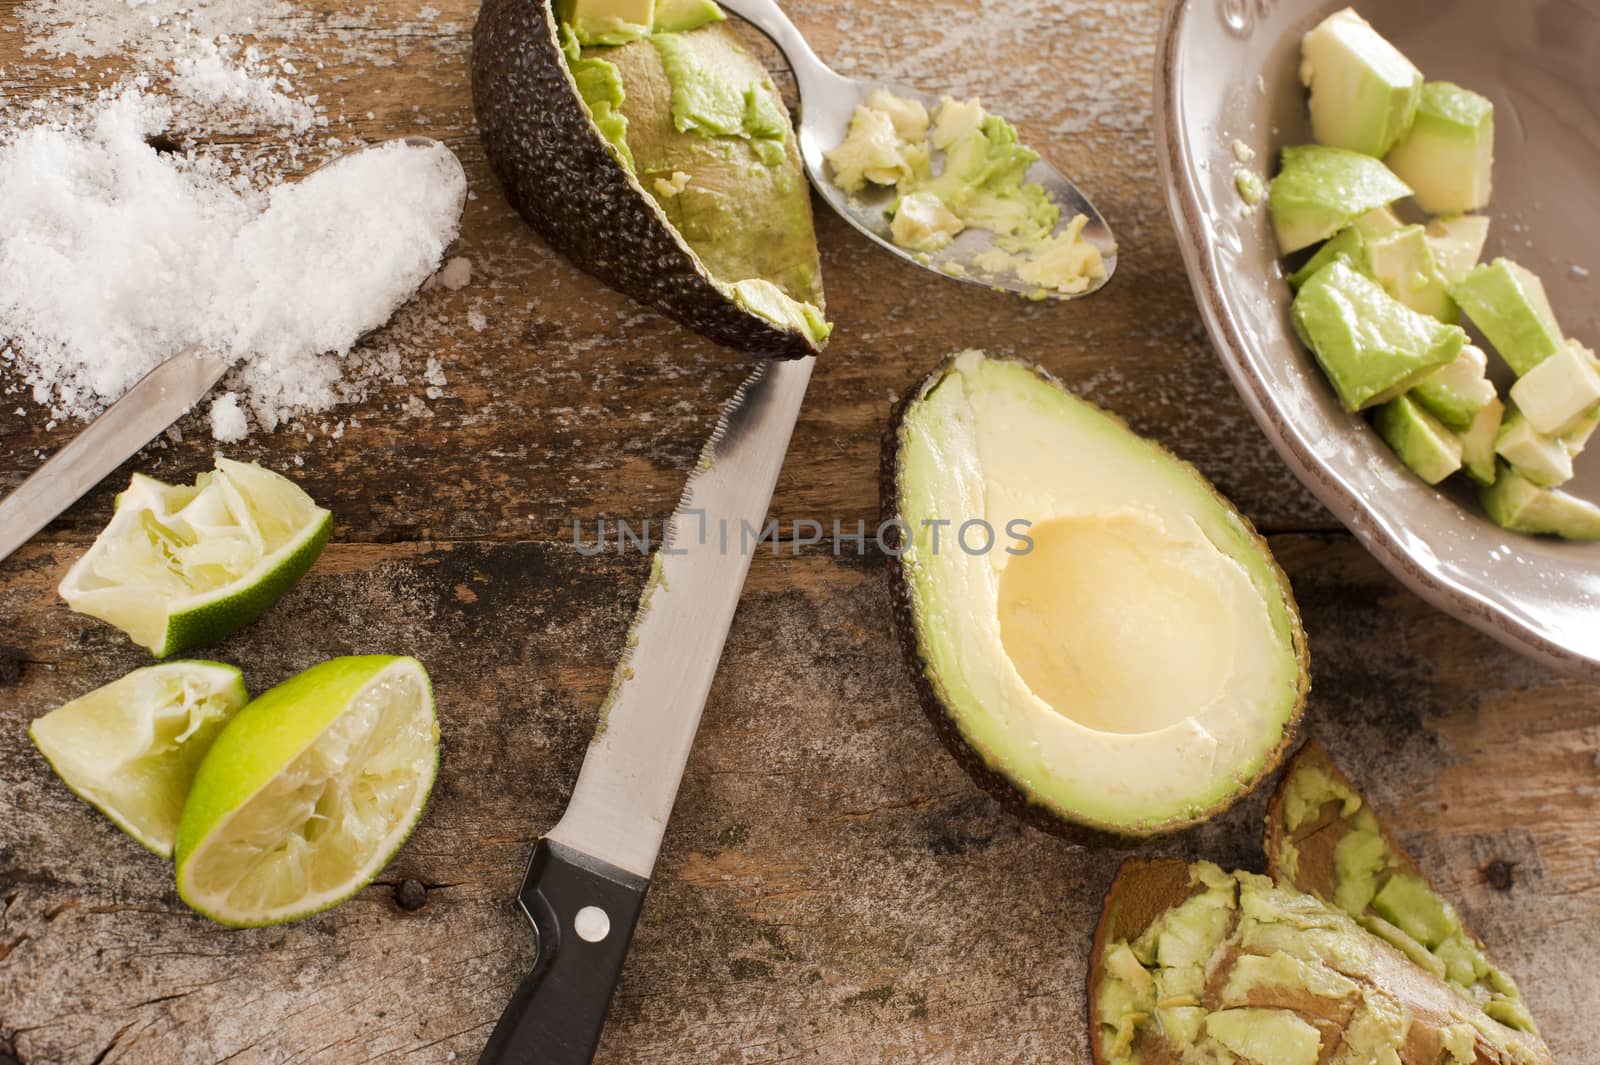 Preparing a delicious fresh avocado salad with a halved avocado next to a bowl with peeled and diced pulp together with a knife, salt and squeezed lemon on an old wooden table, view from above